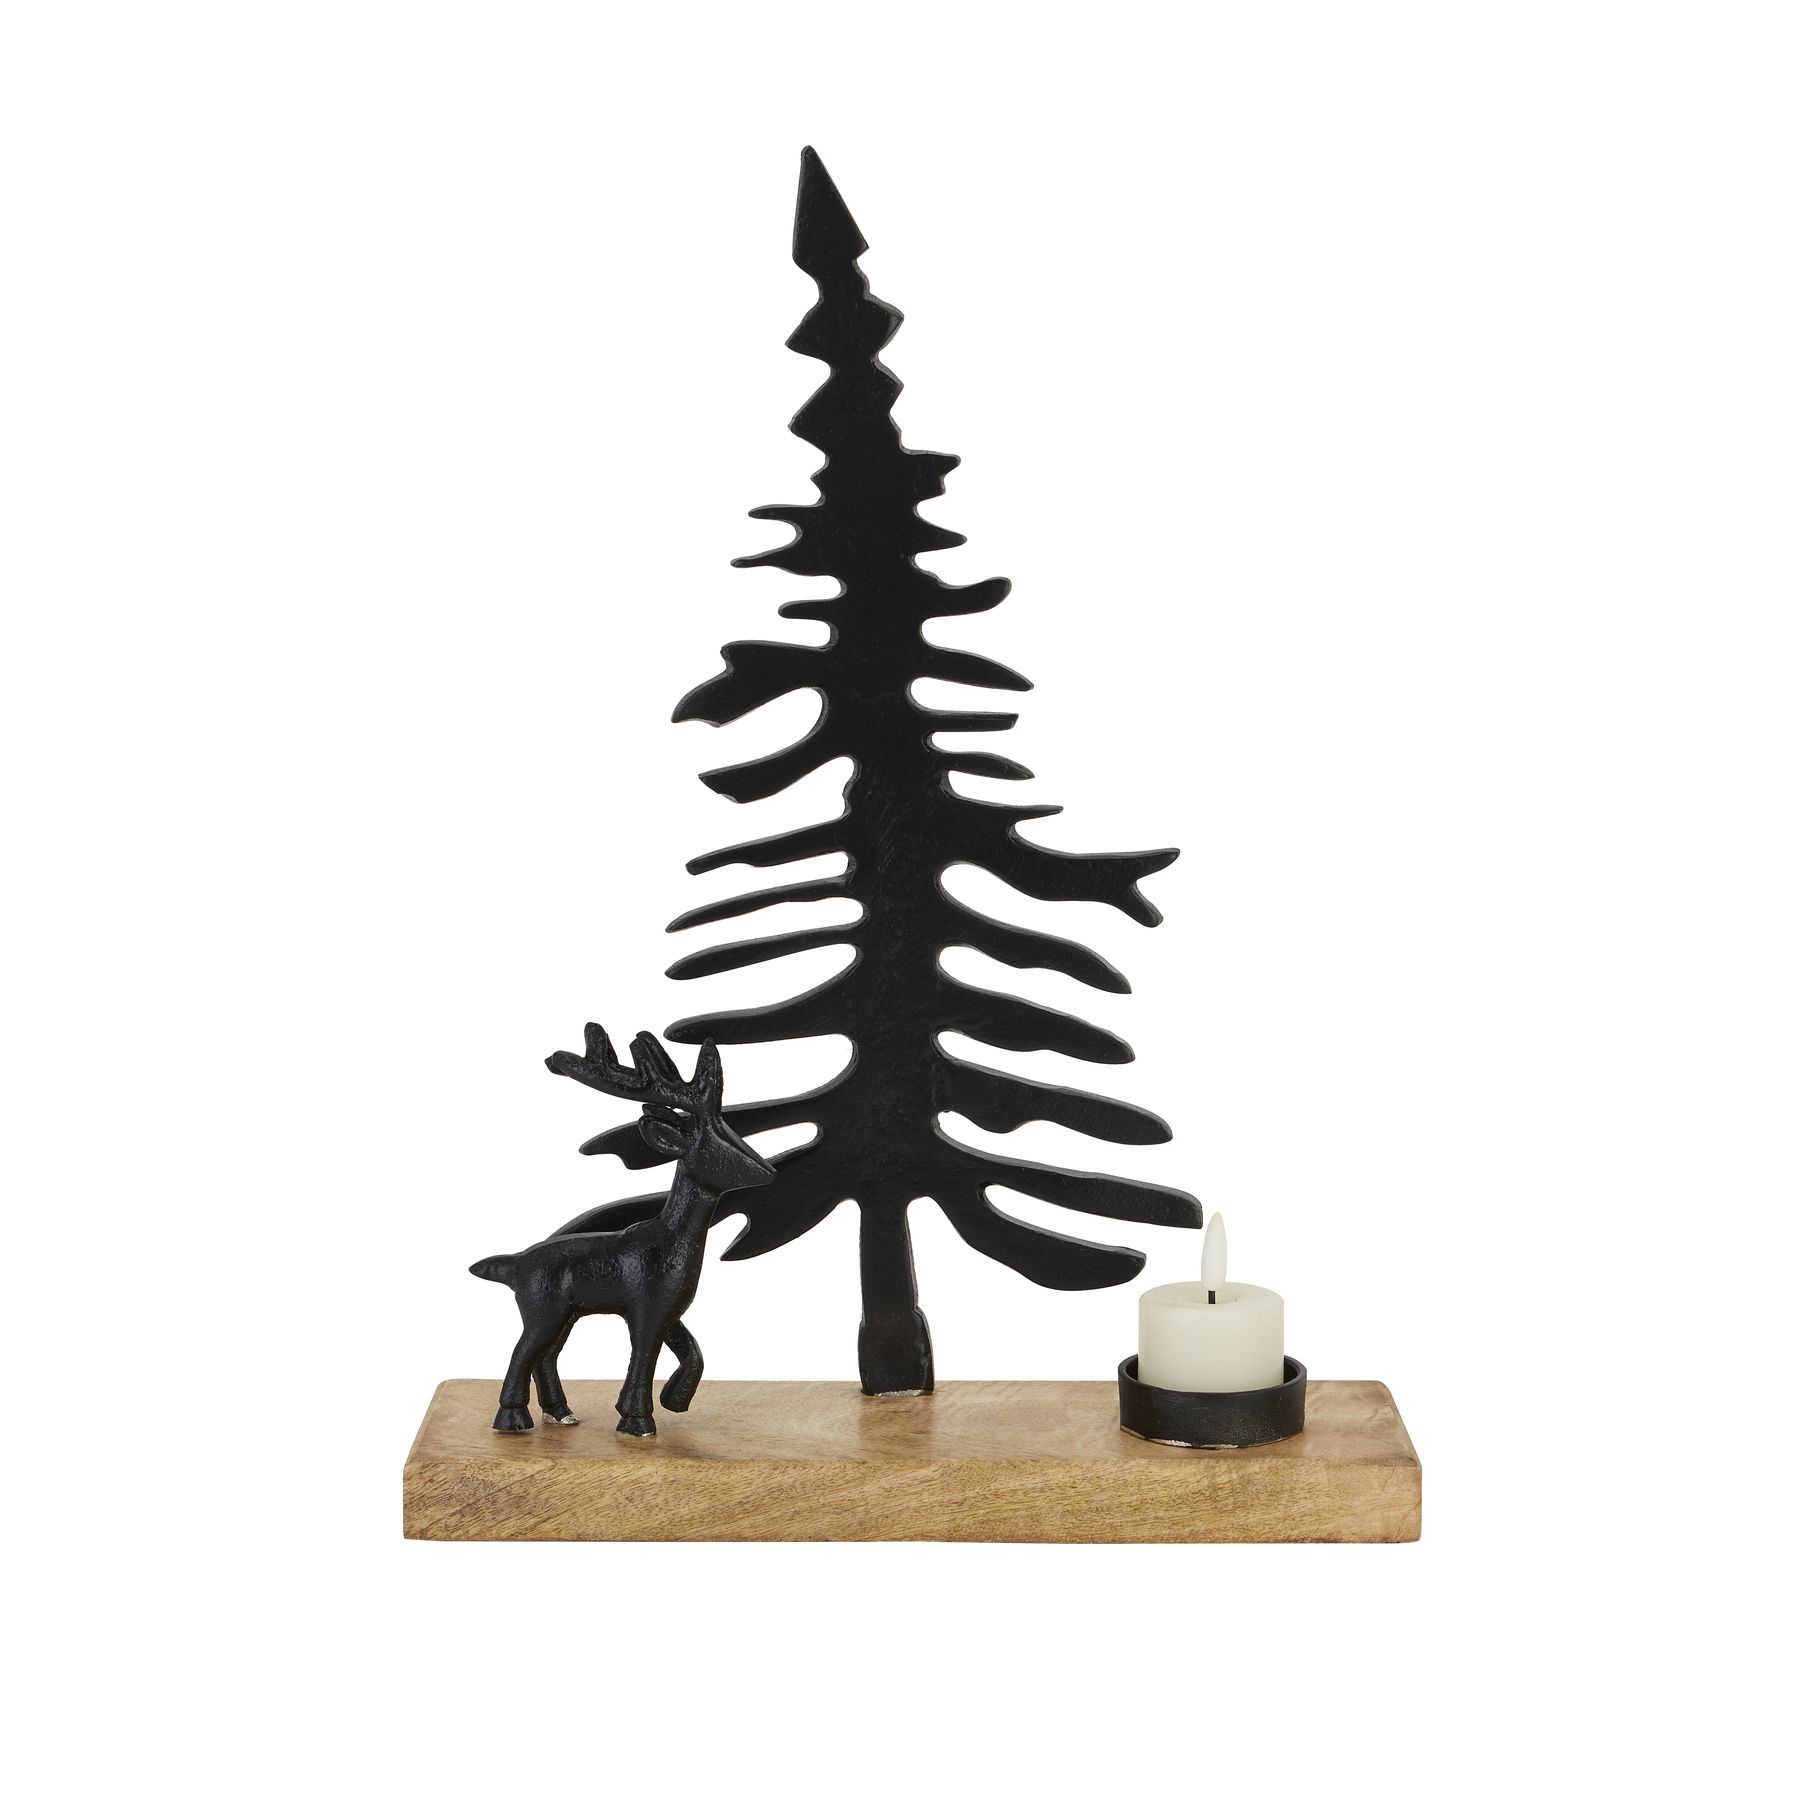 Large Cast Tree And Stag Black Candle Holder Ornament - Image 2